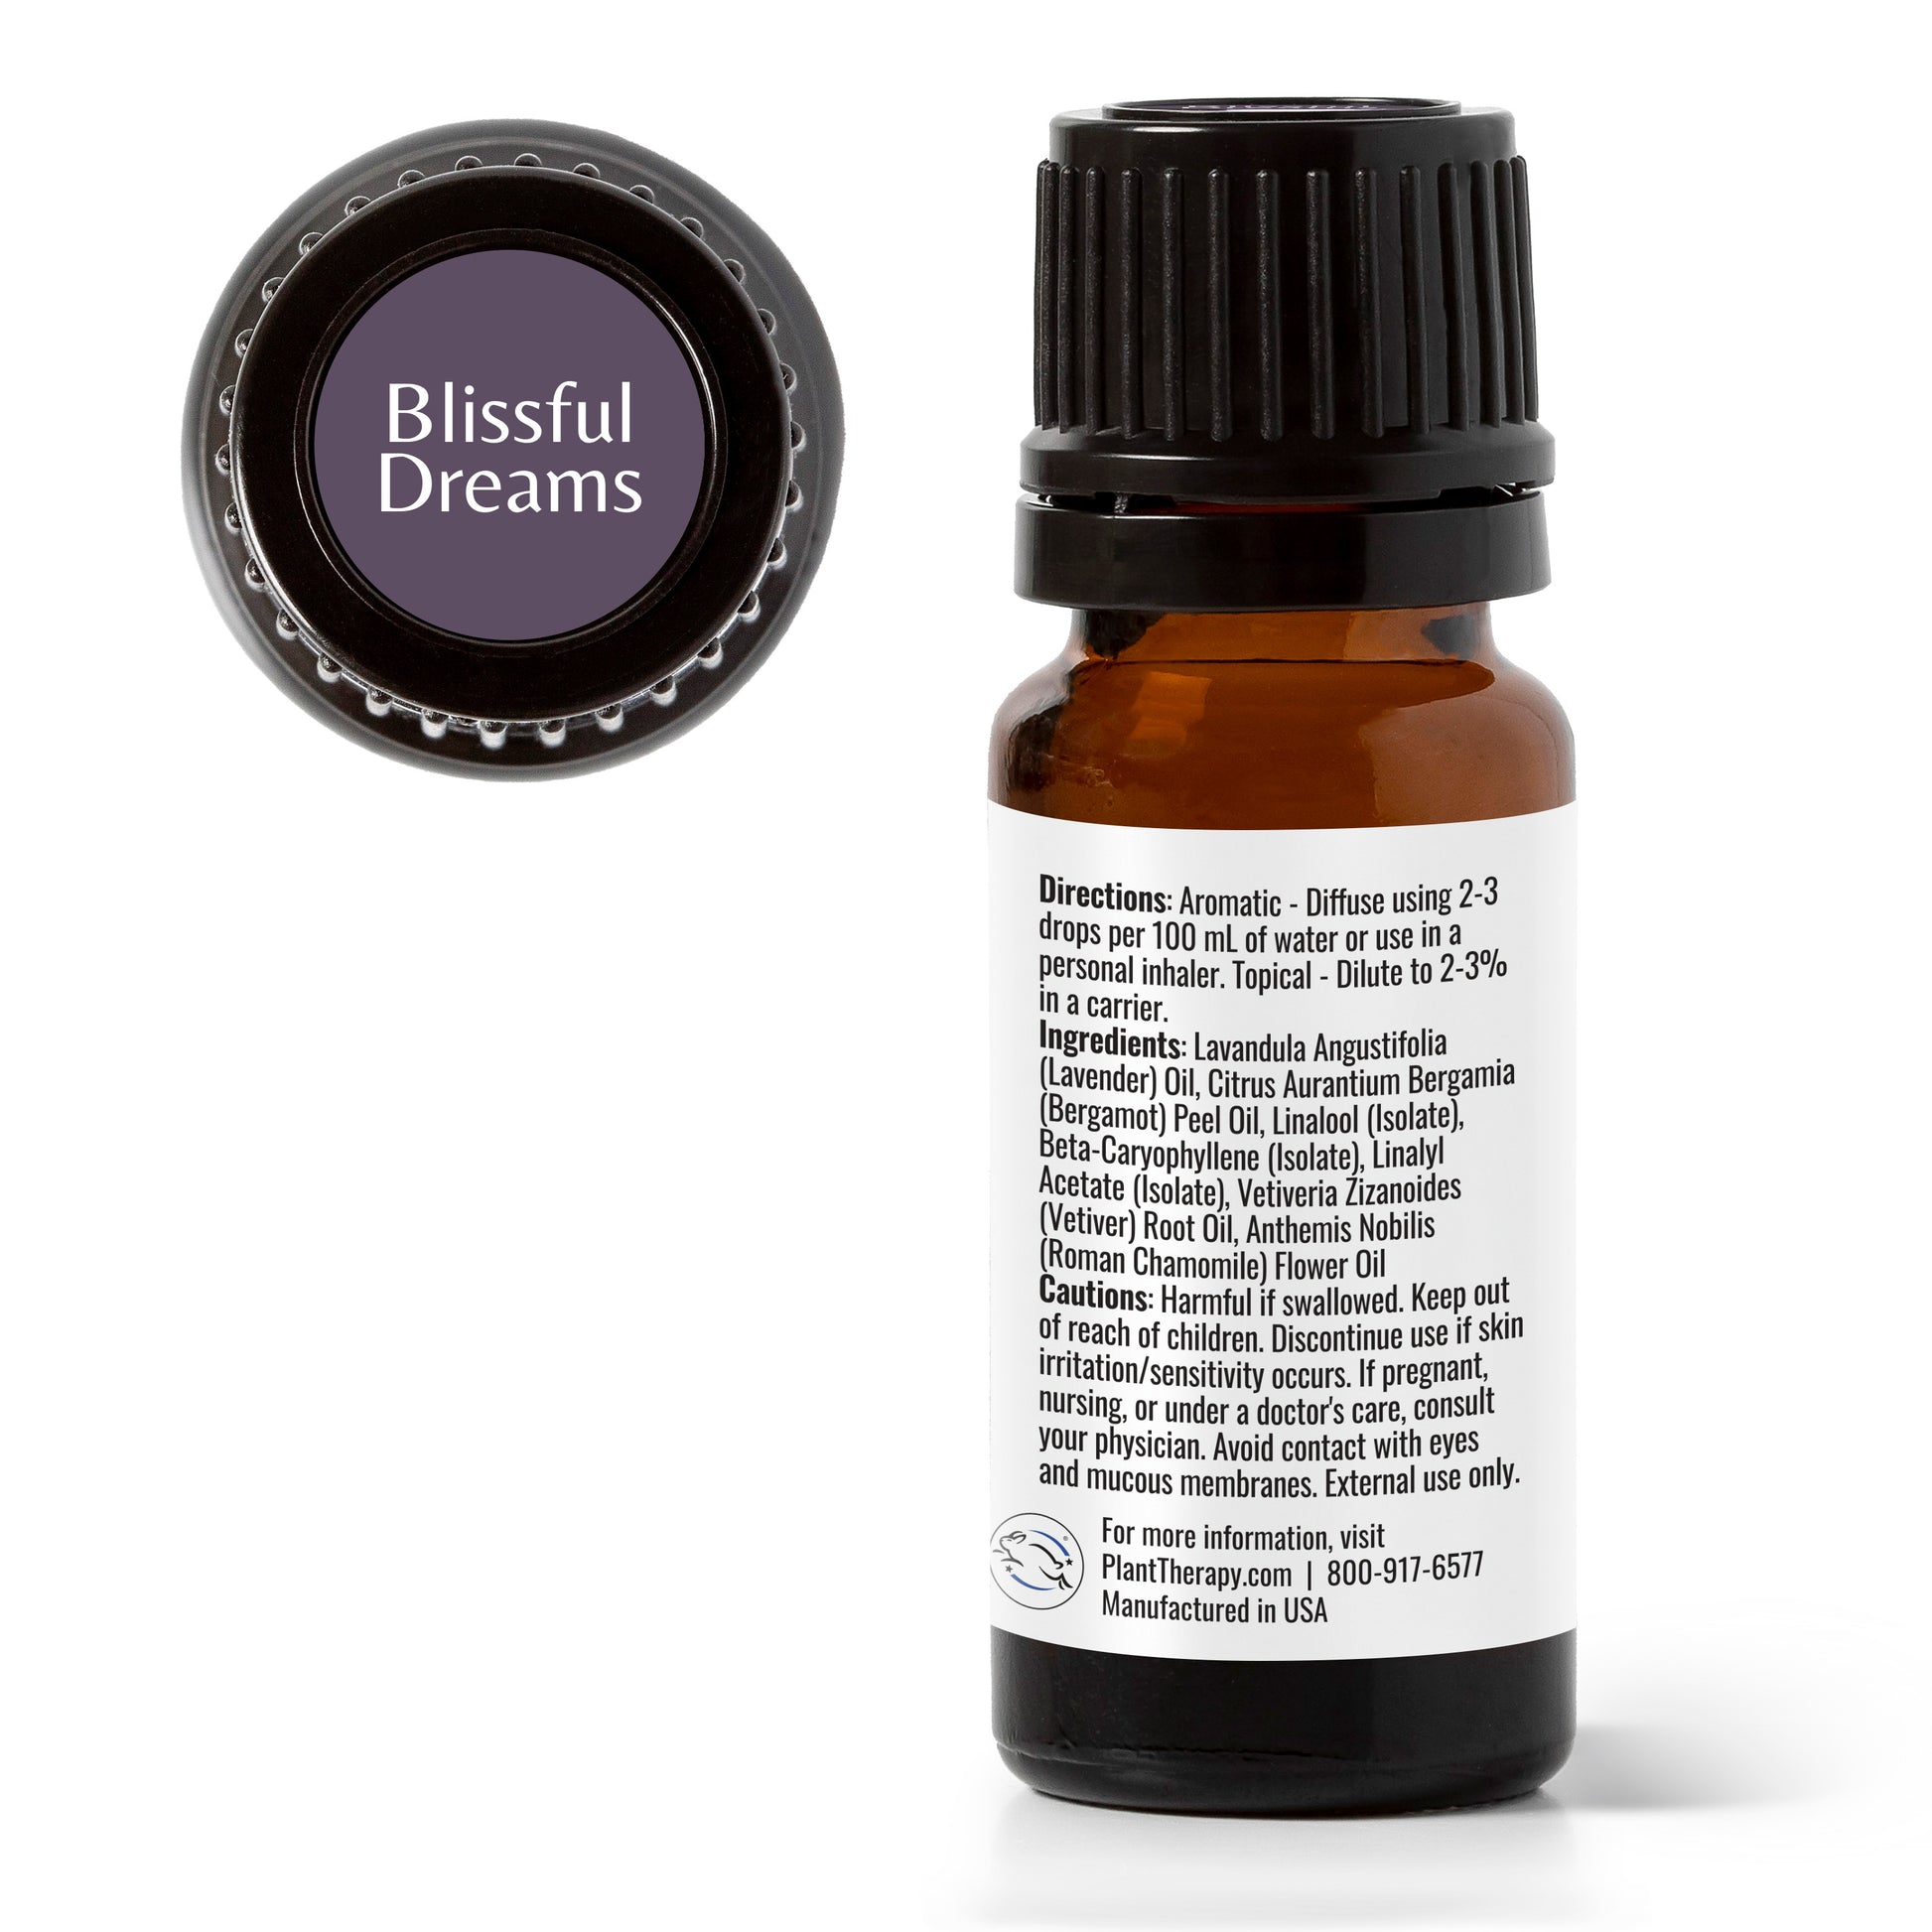 Plant Therapy Blissful Dreams Essential Oil Blend, for Relaxation While Supporting Quality Rest, Grounding and Soothing, Lovely Bedtime Aroma, 10 ml